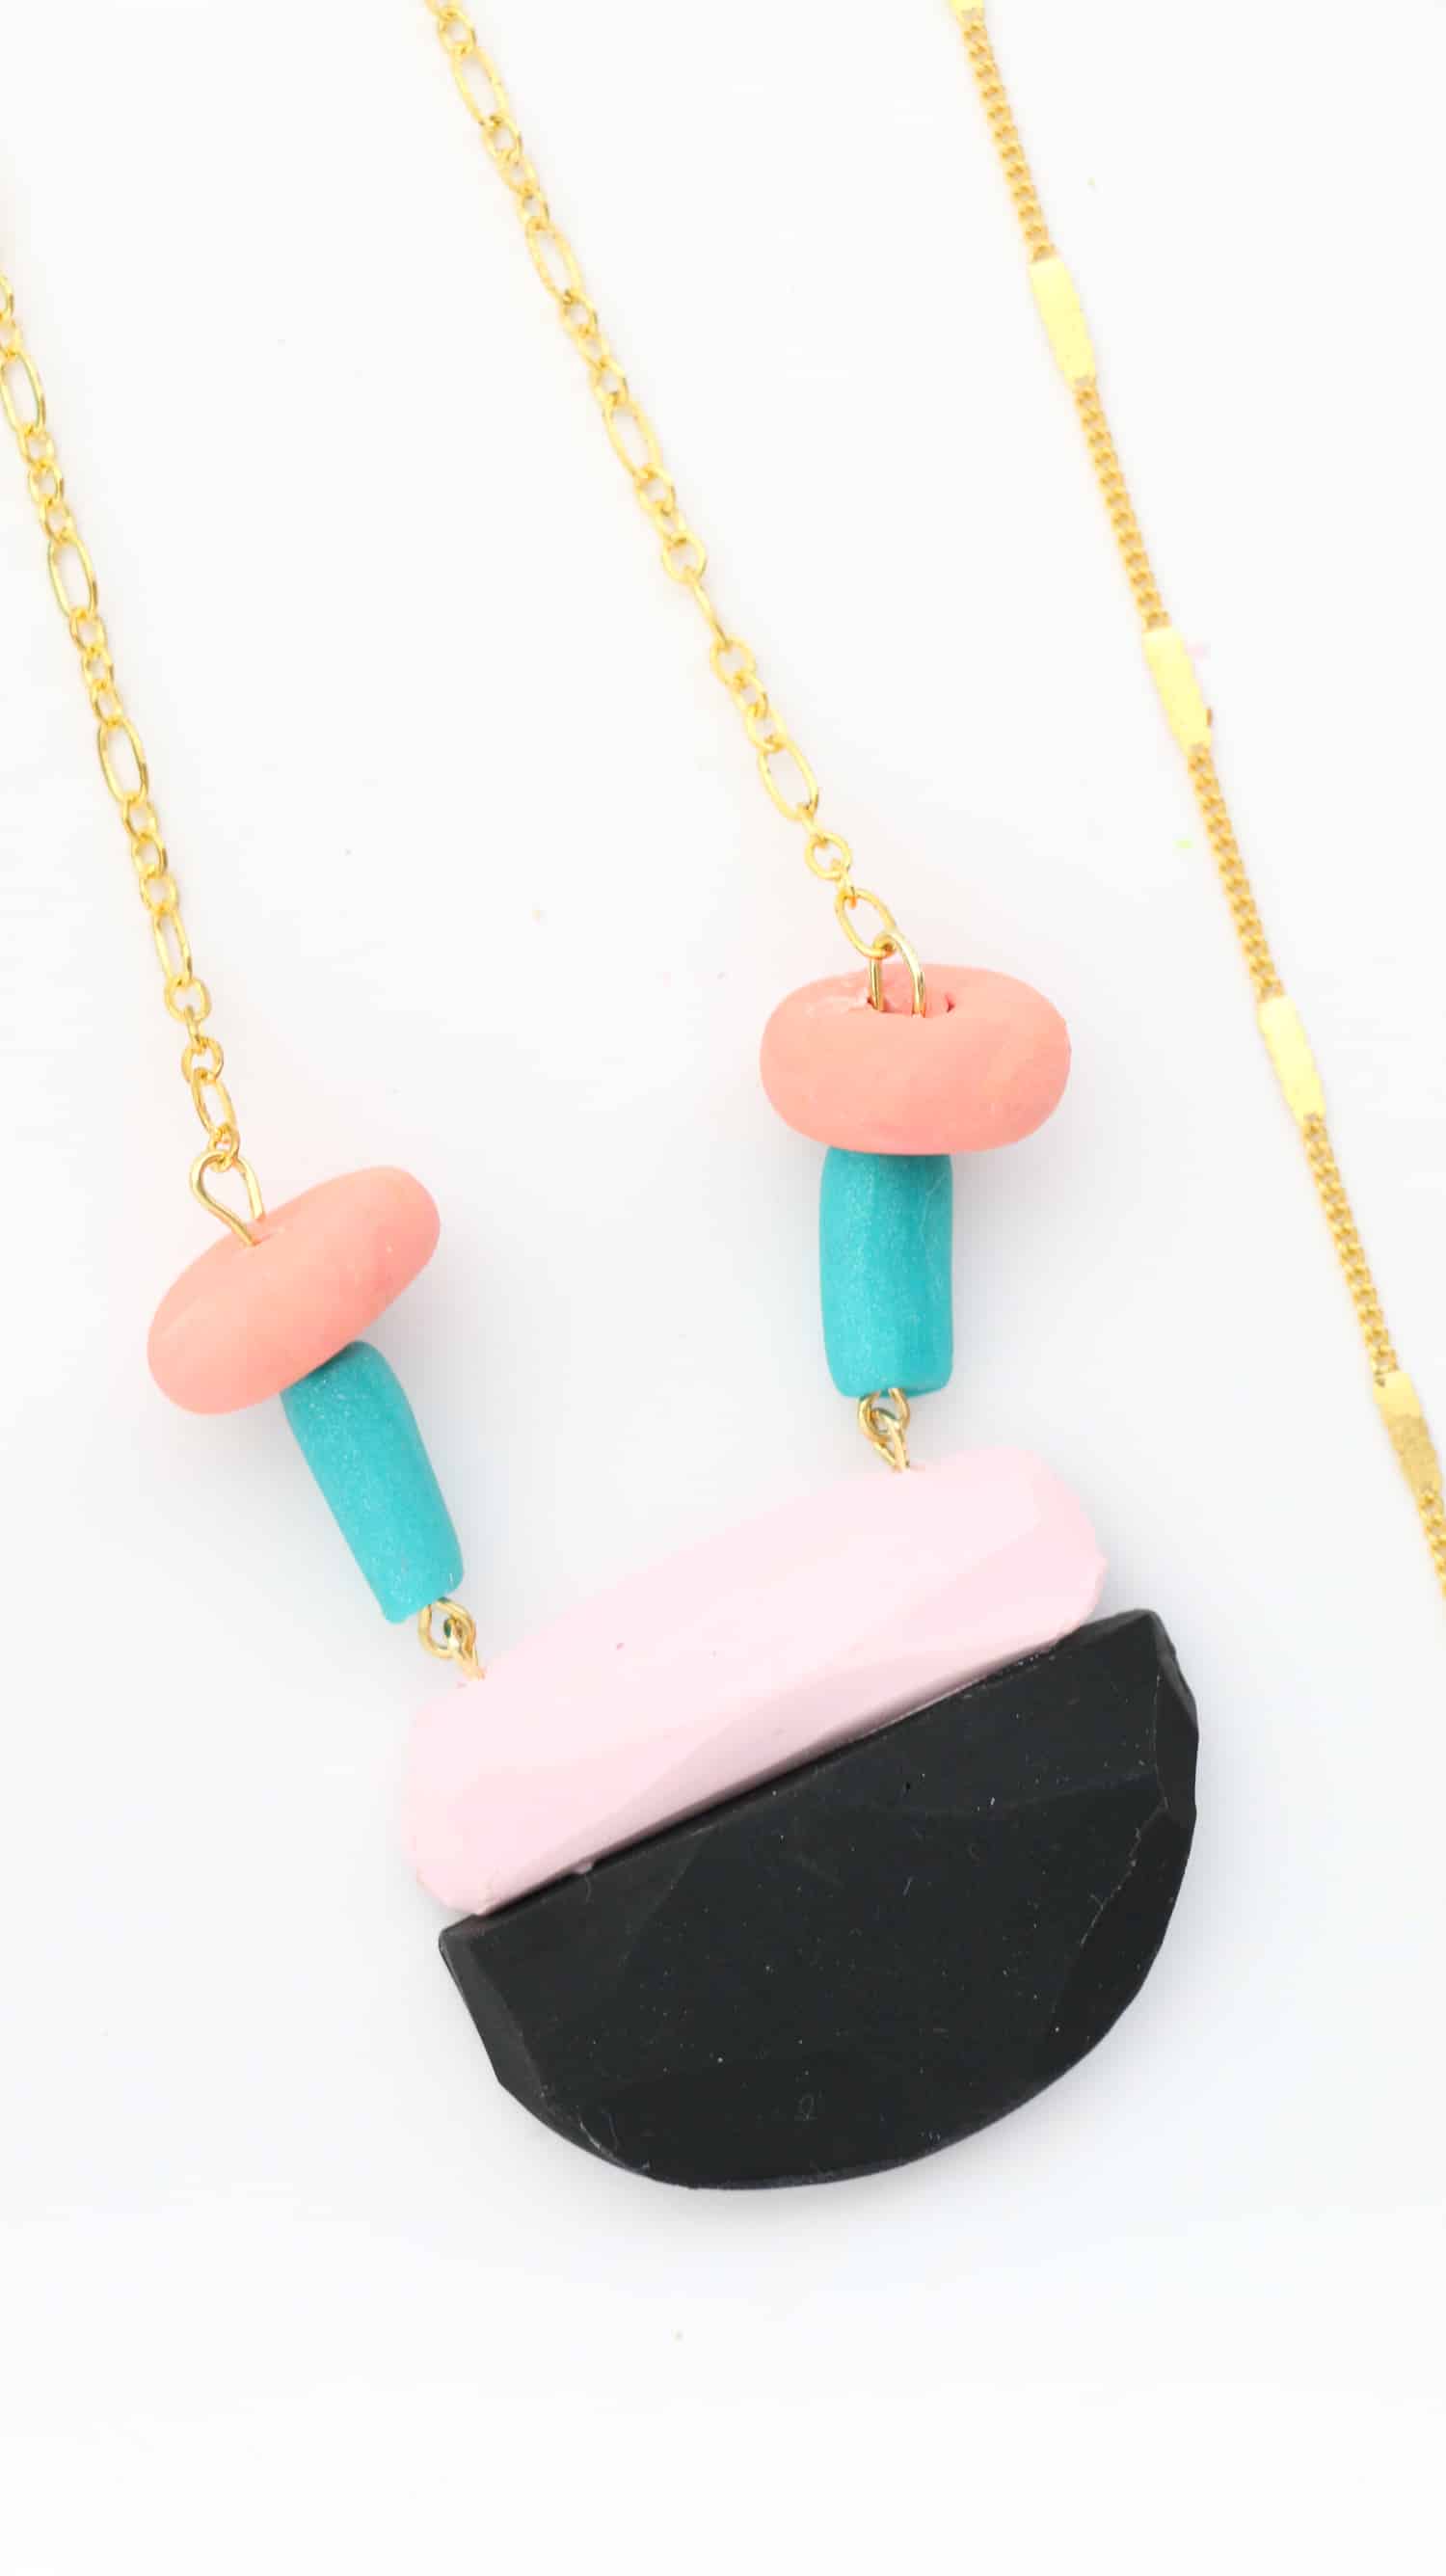 DIY-Colorful-Geometric-Necklaces-click-through-for-tutorial-_-4